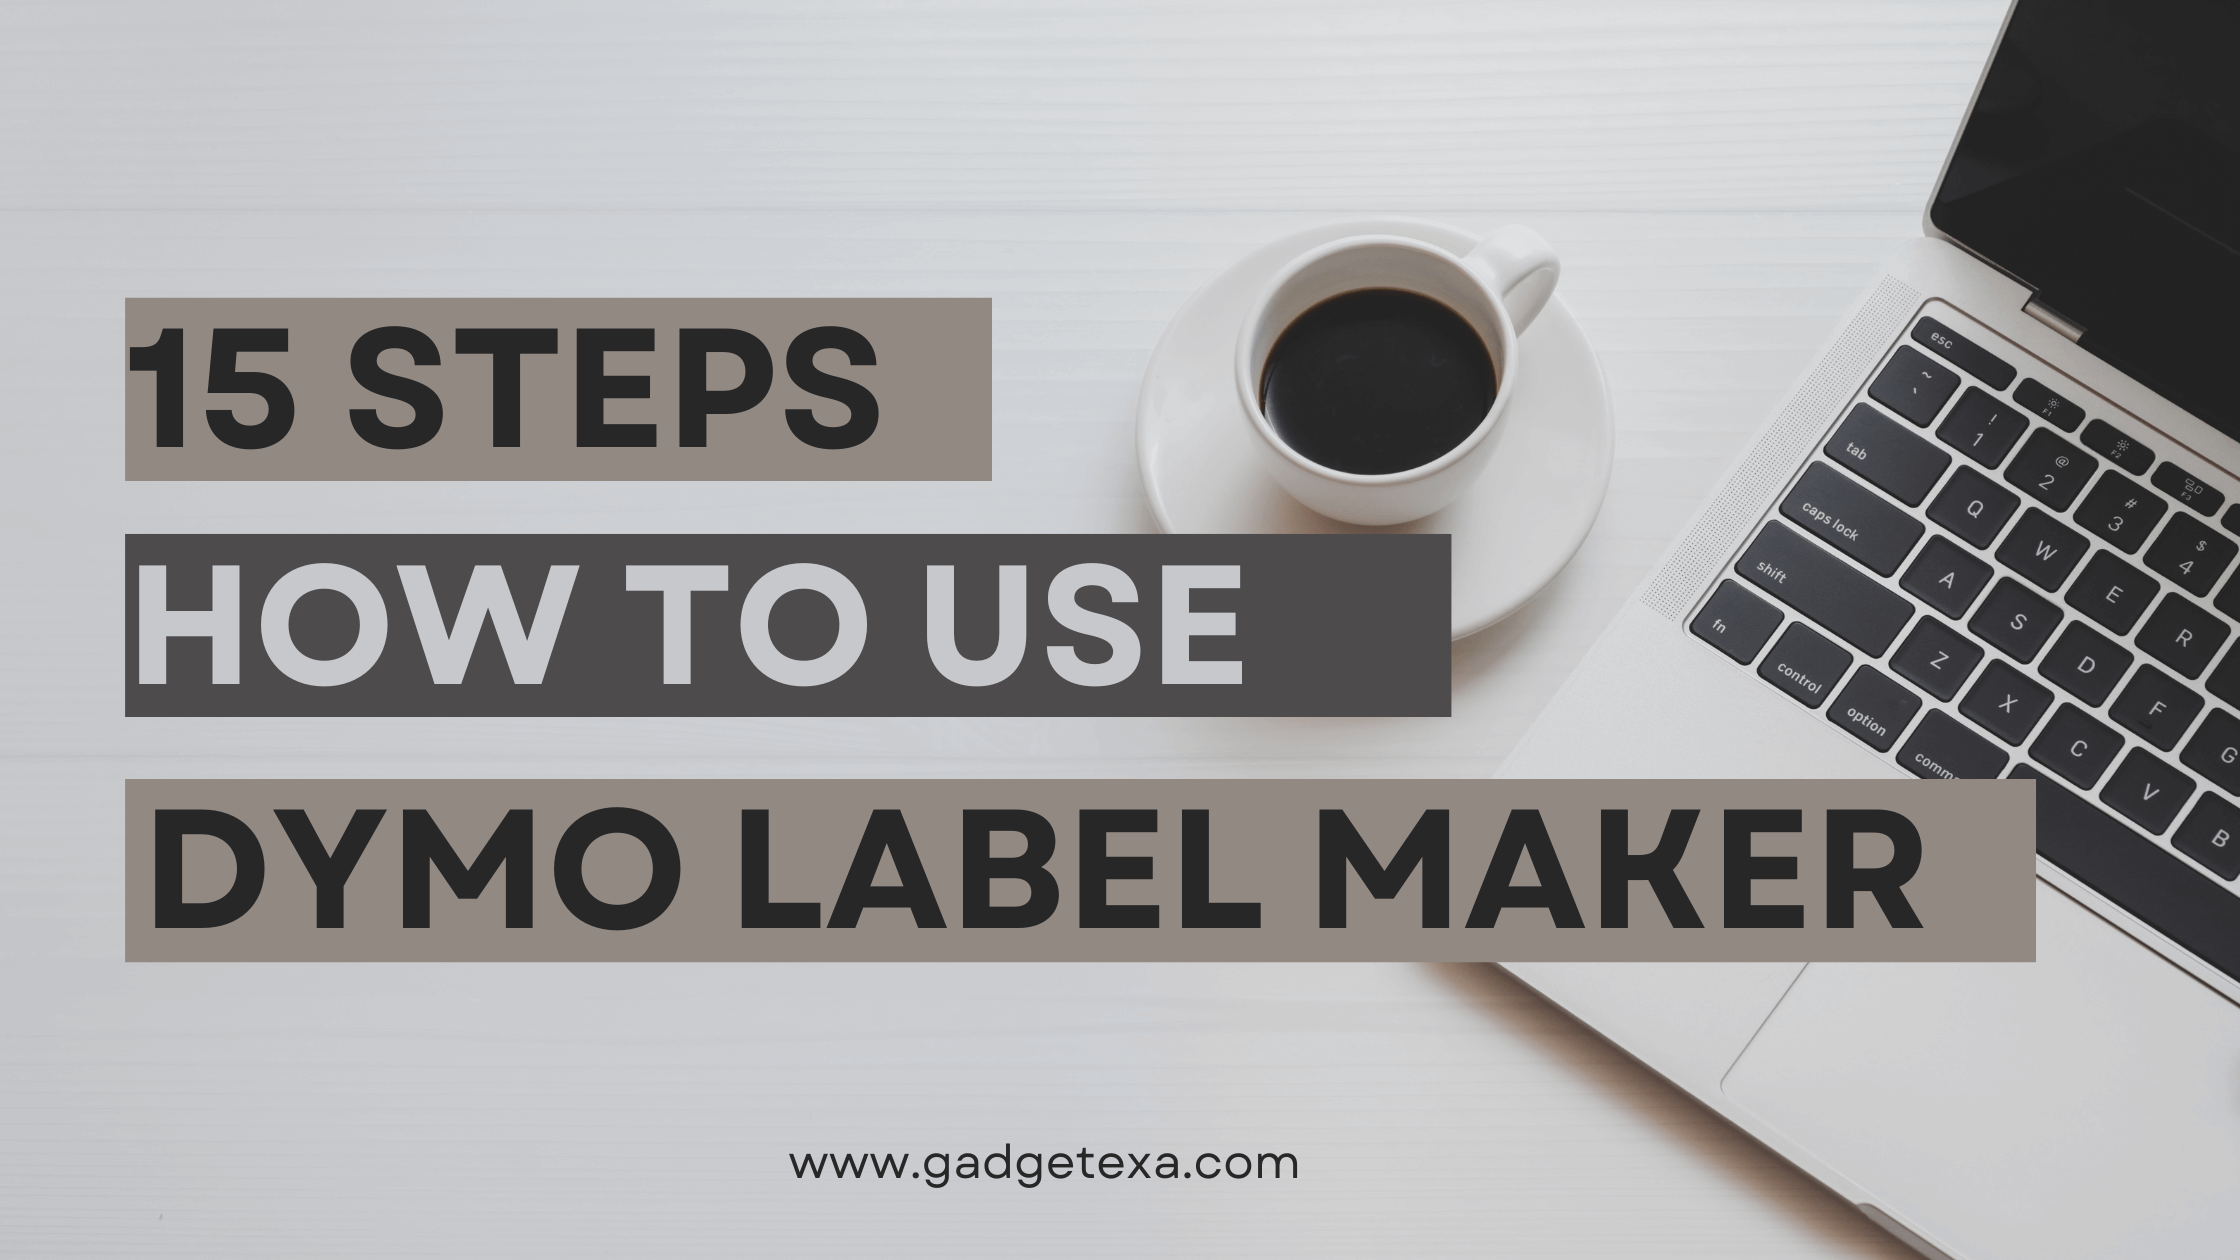 You are currently viewing How to use Dymo label maker in 15 steps